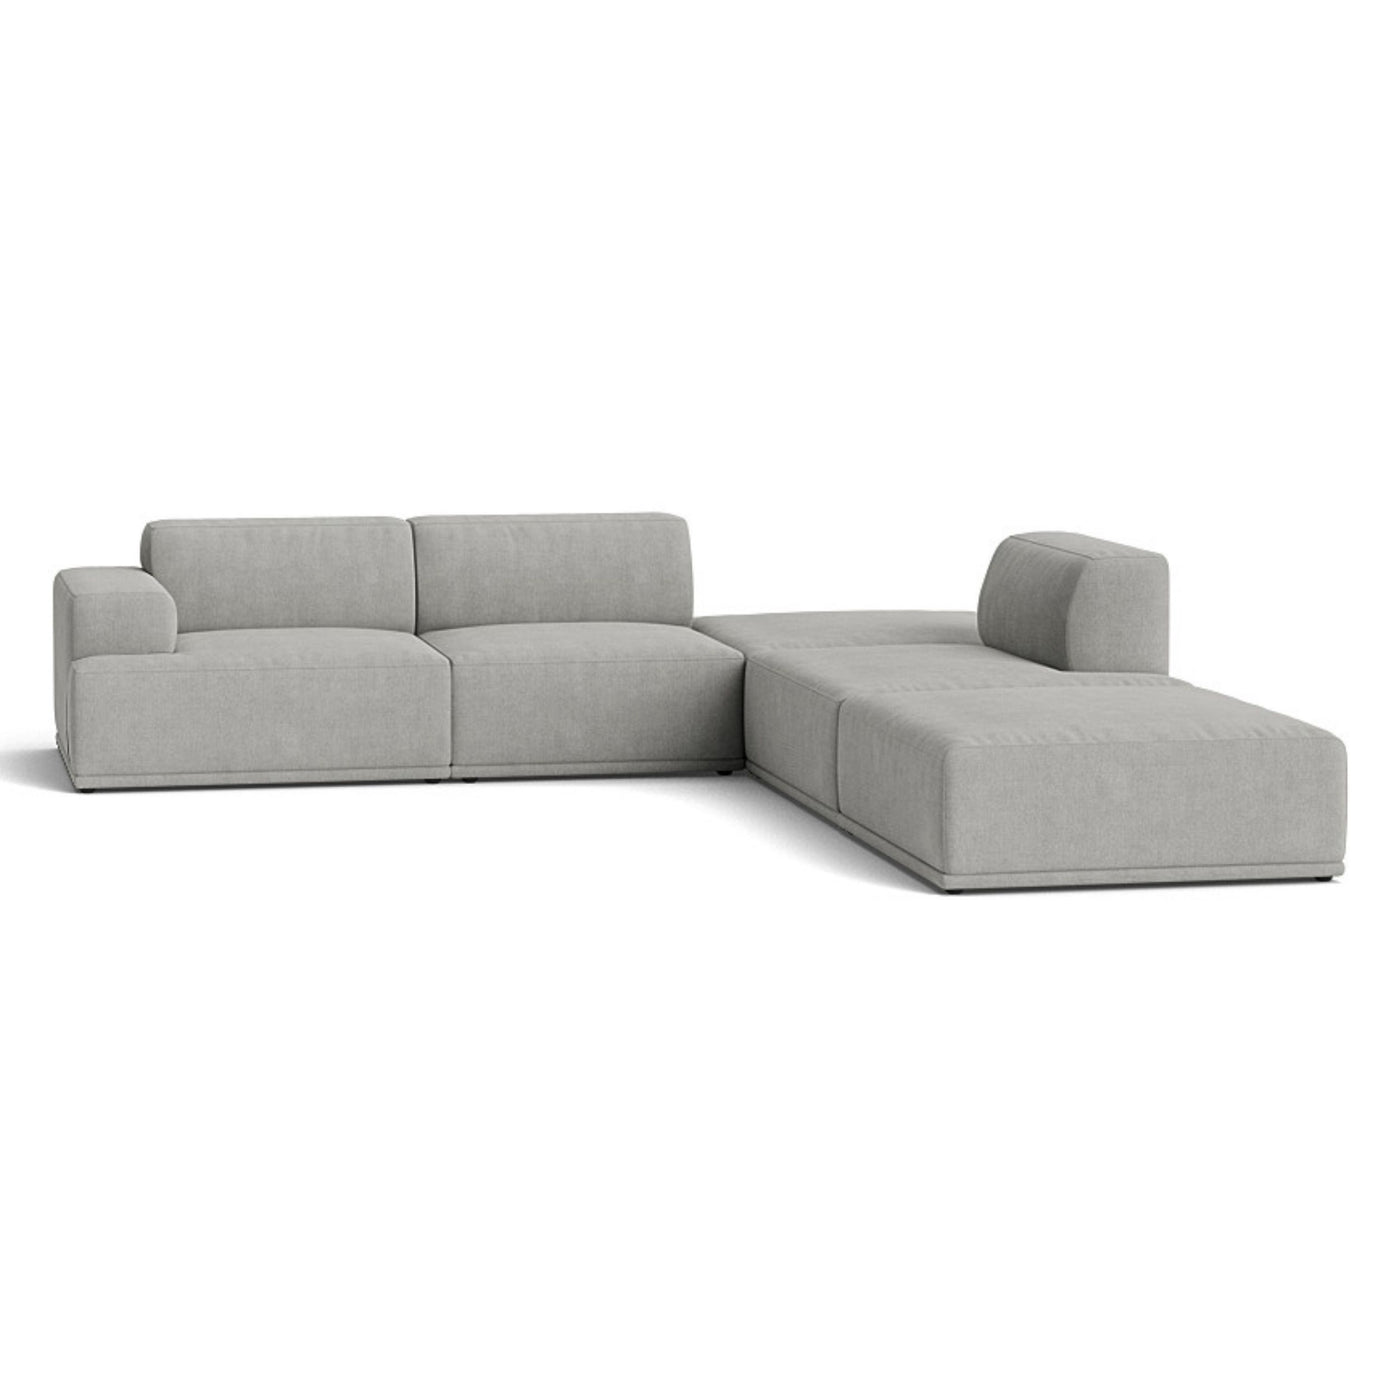 Muuto Connect Soft Modular Corner Sofa, configuration 3. made-to-order from someday designs. #colour_fiord-151